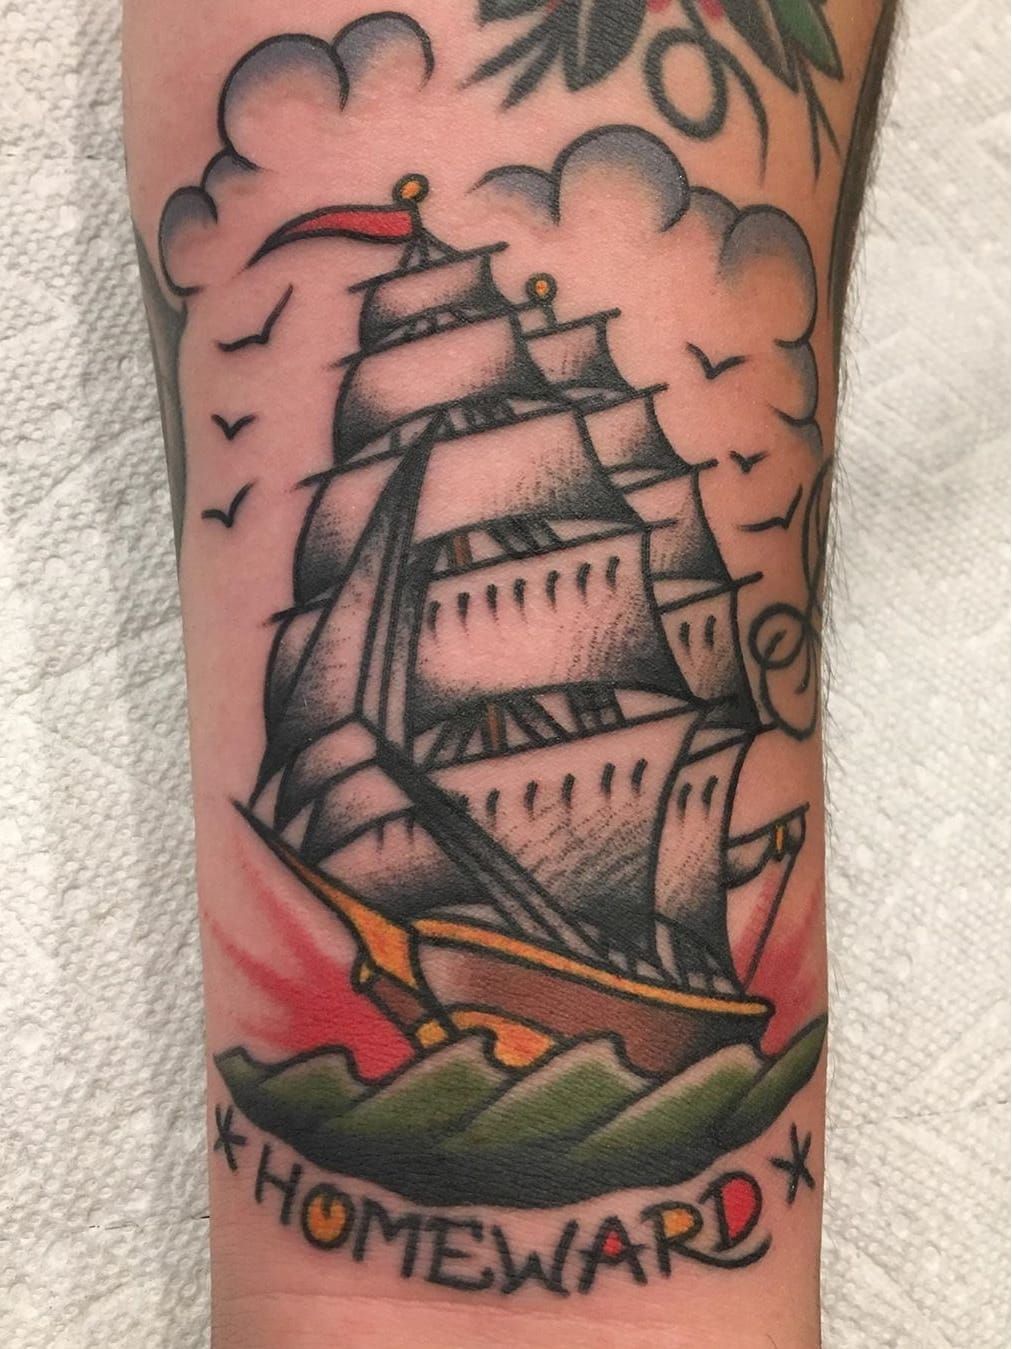 Buy Traditional Tattoo Sailor Jerry Sailing Ship Boat Vintage Look Online  in India  Etsy